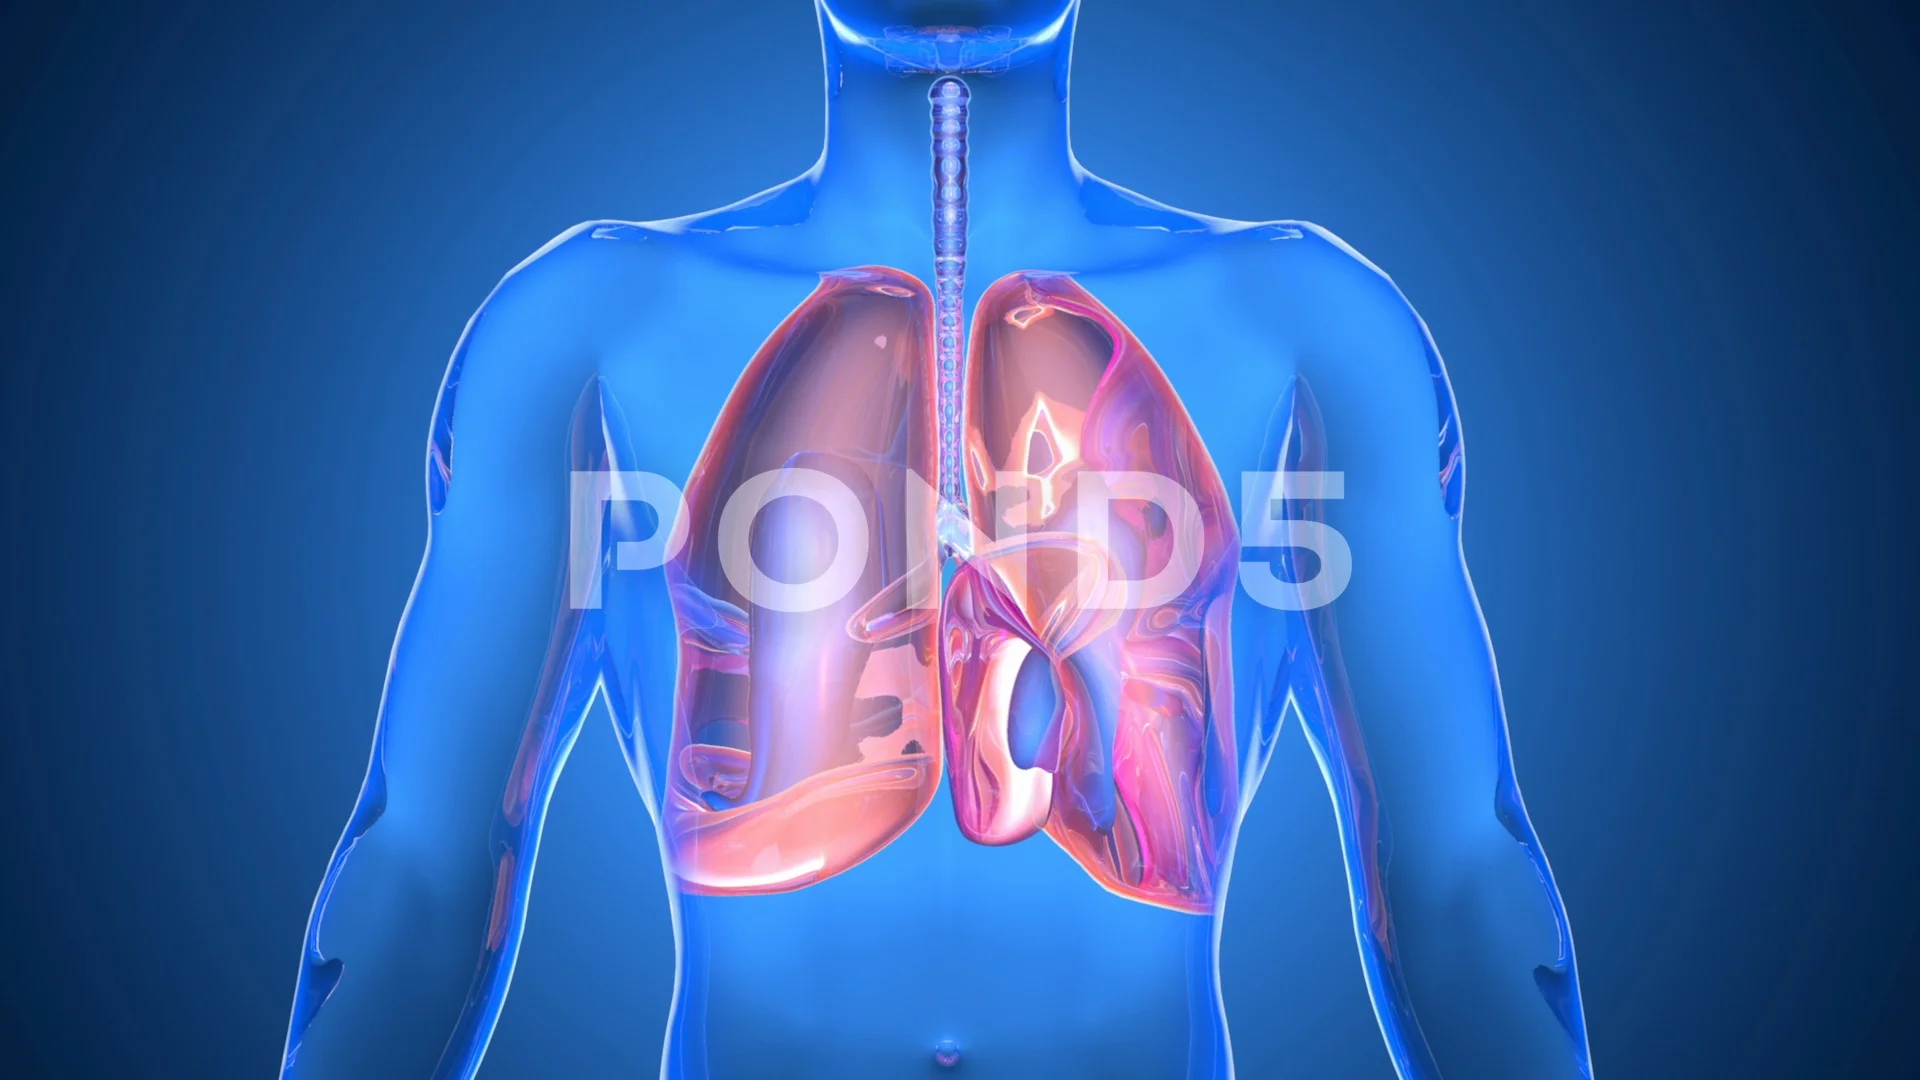 Anatomical animation of breathing Lungs | Stock Video | Pond5